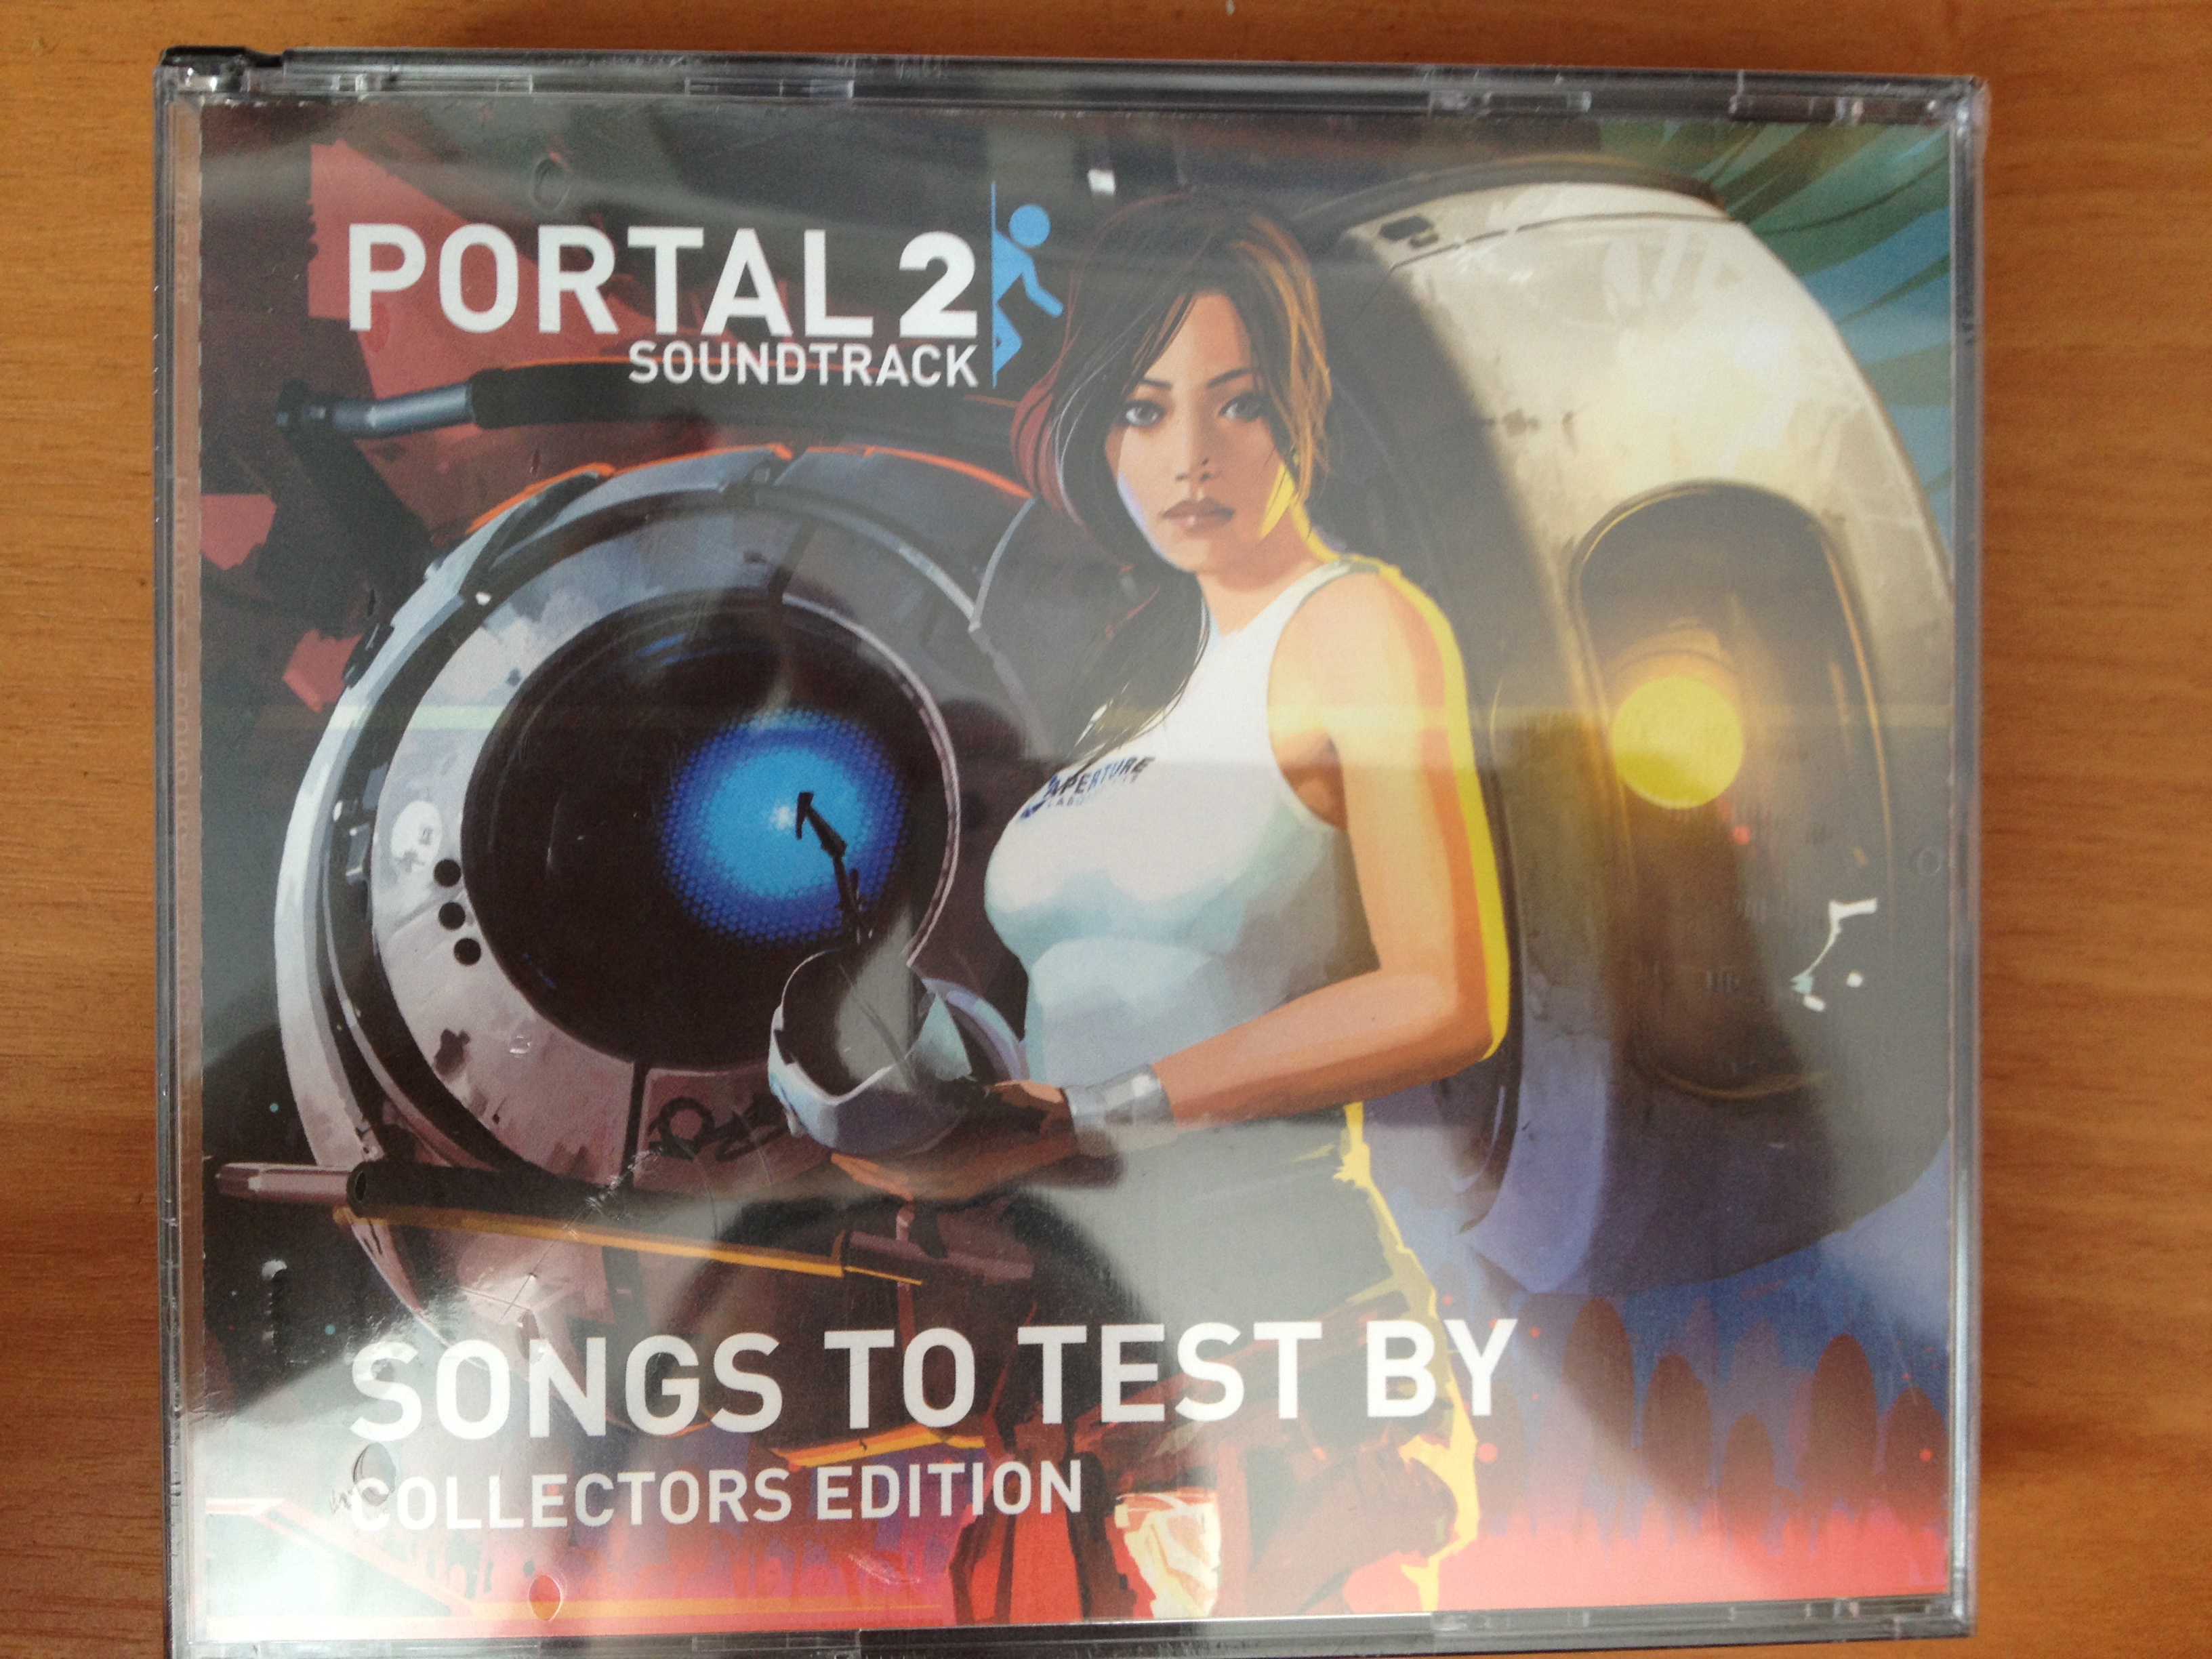 Portal 2 ost bombs for throwing at you фото 4